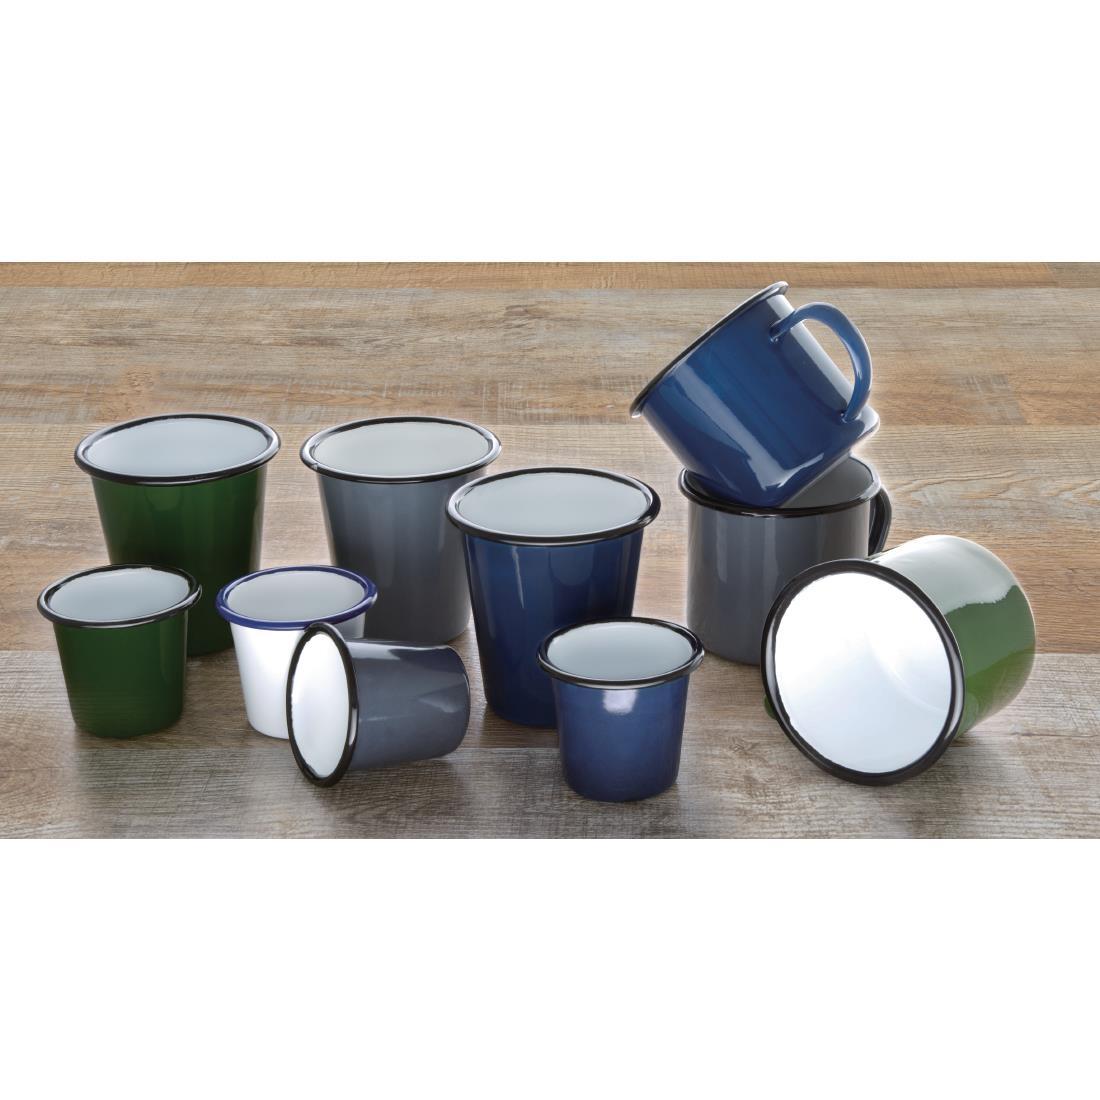 Olympia Enamel Sauce Cup Grey and Black (Pack of 6) - DC387  - 4